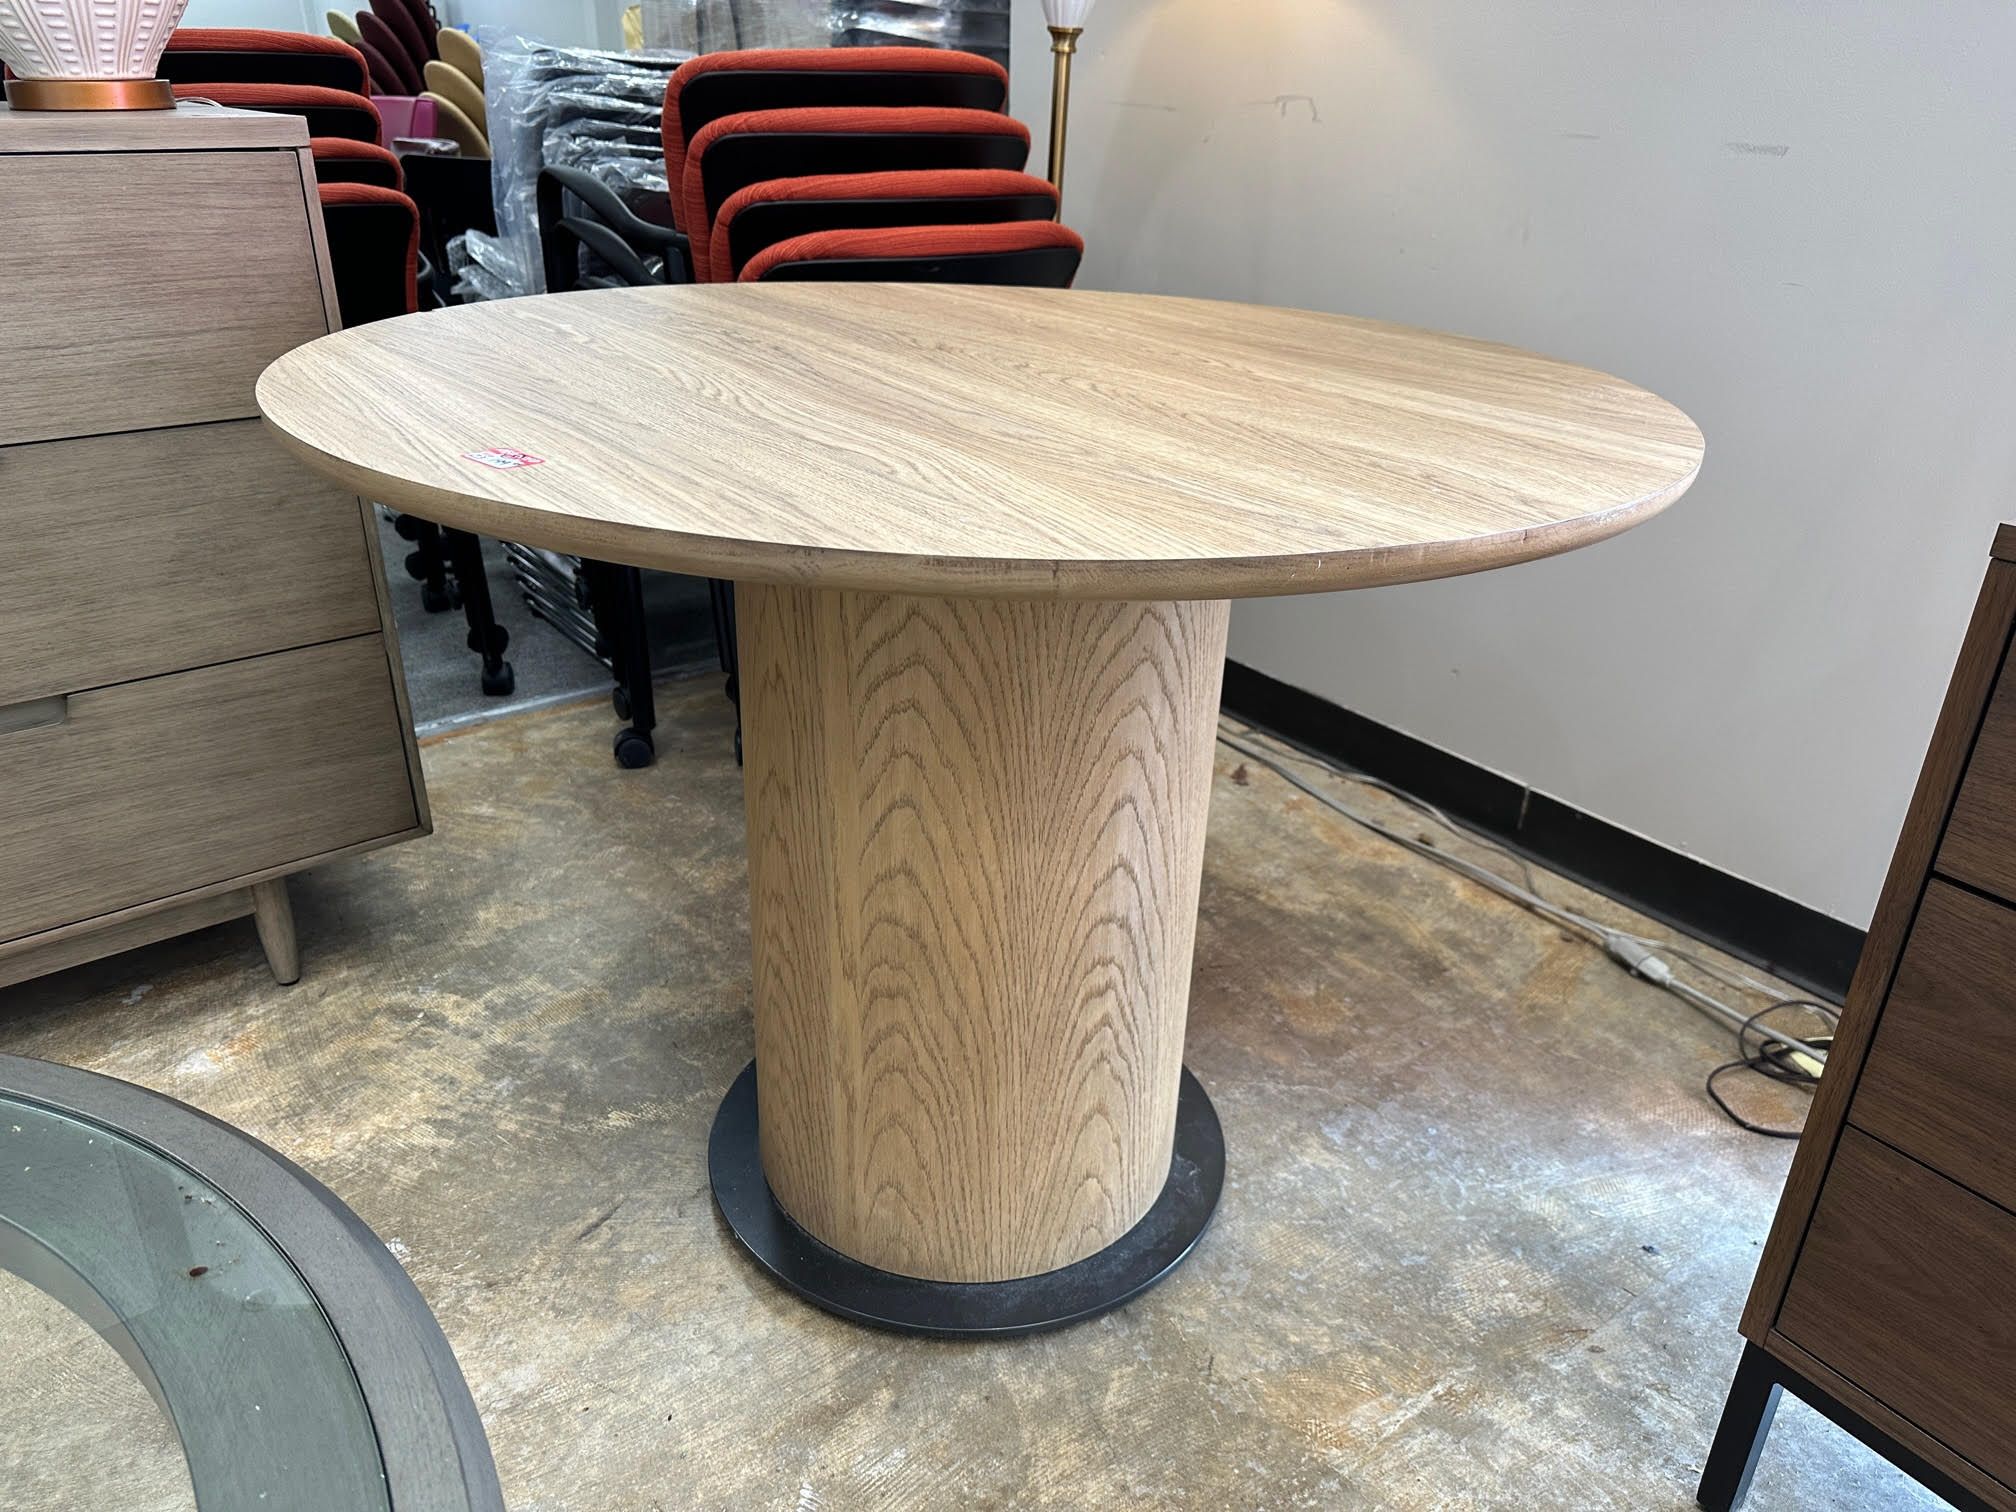 A wooden circular table with a cylinder-style base. 